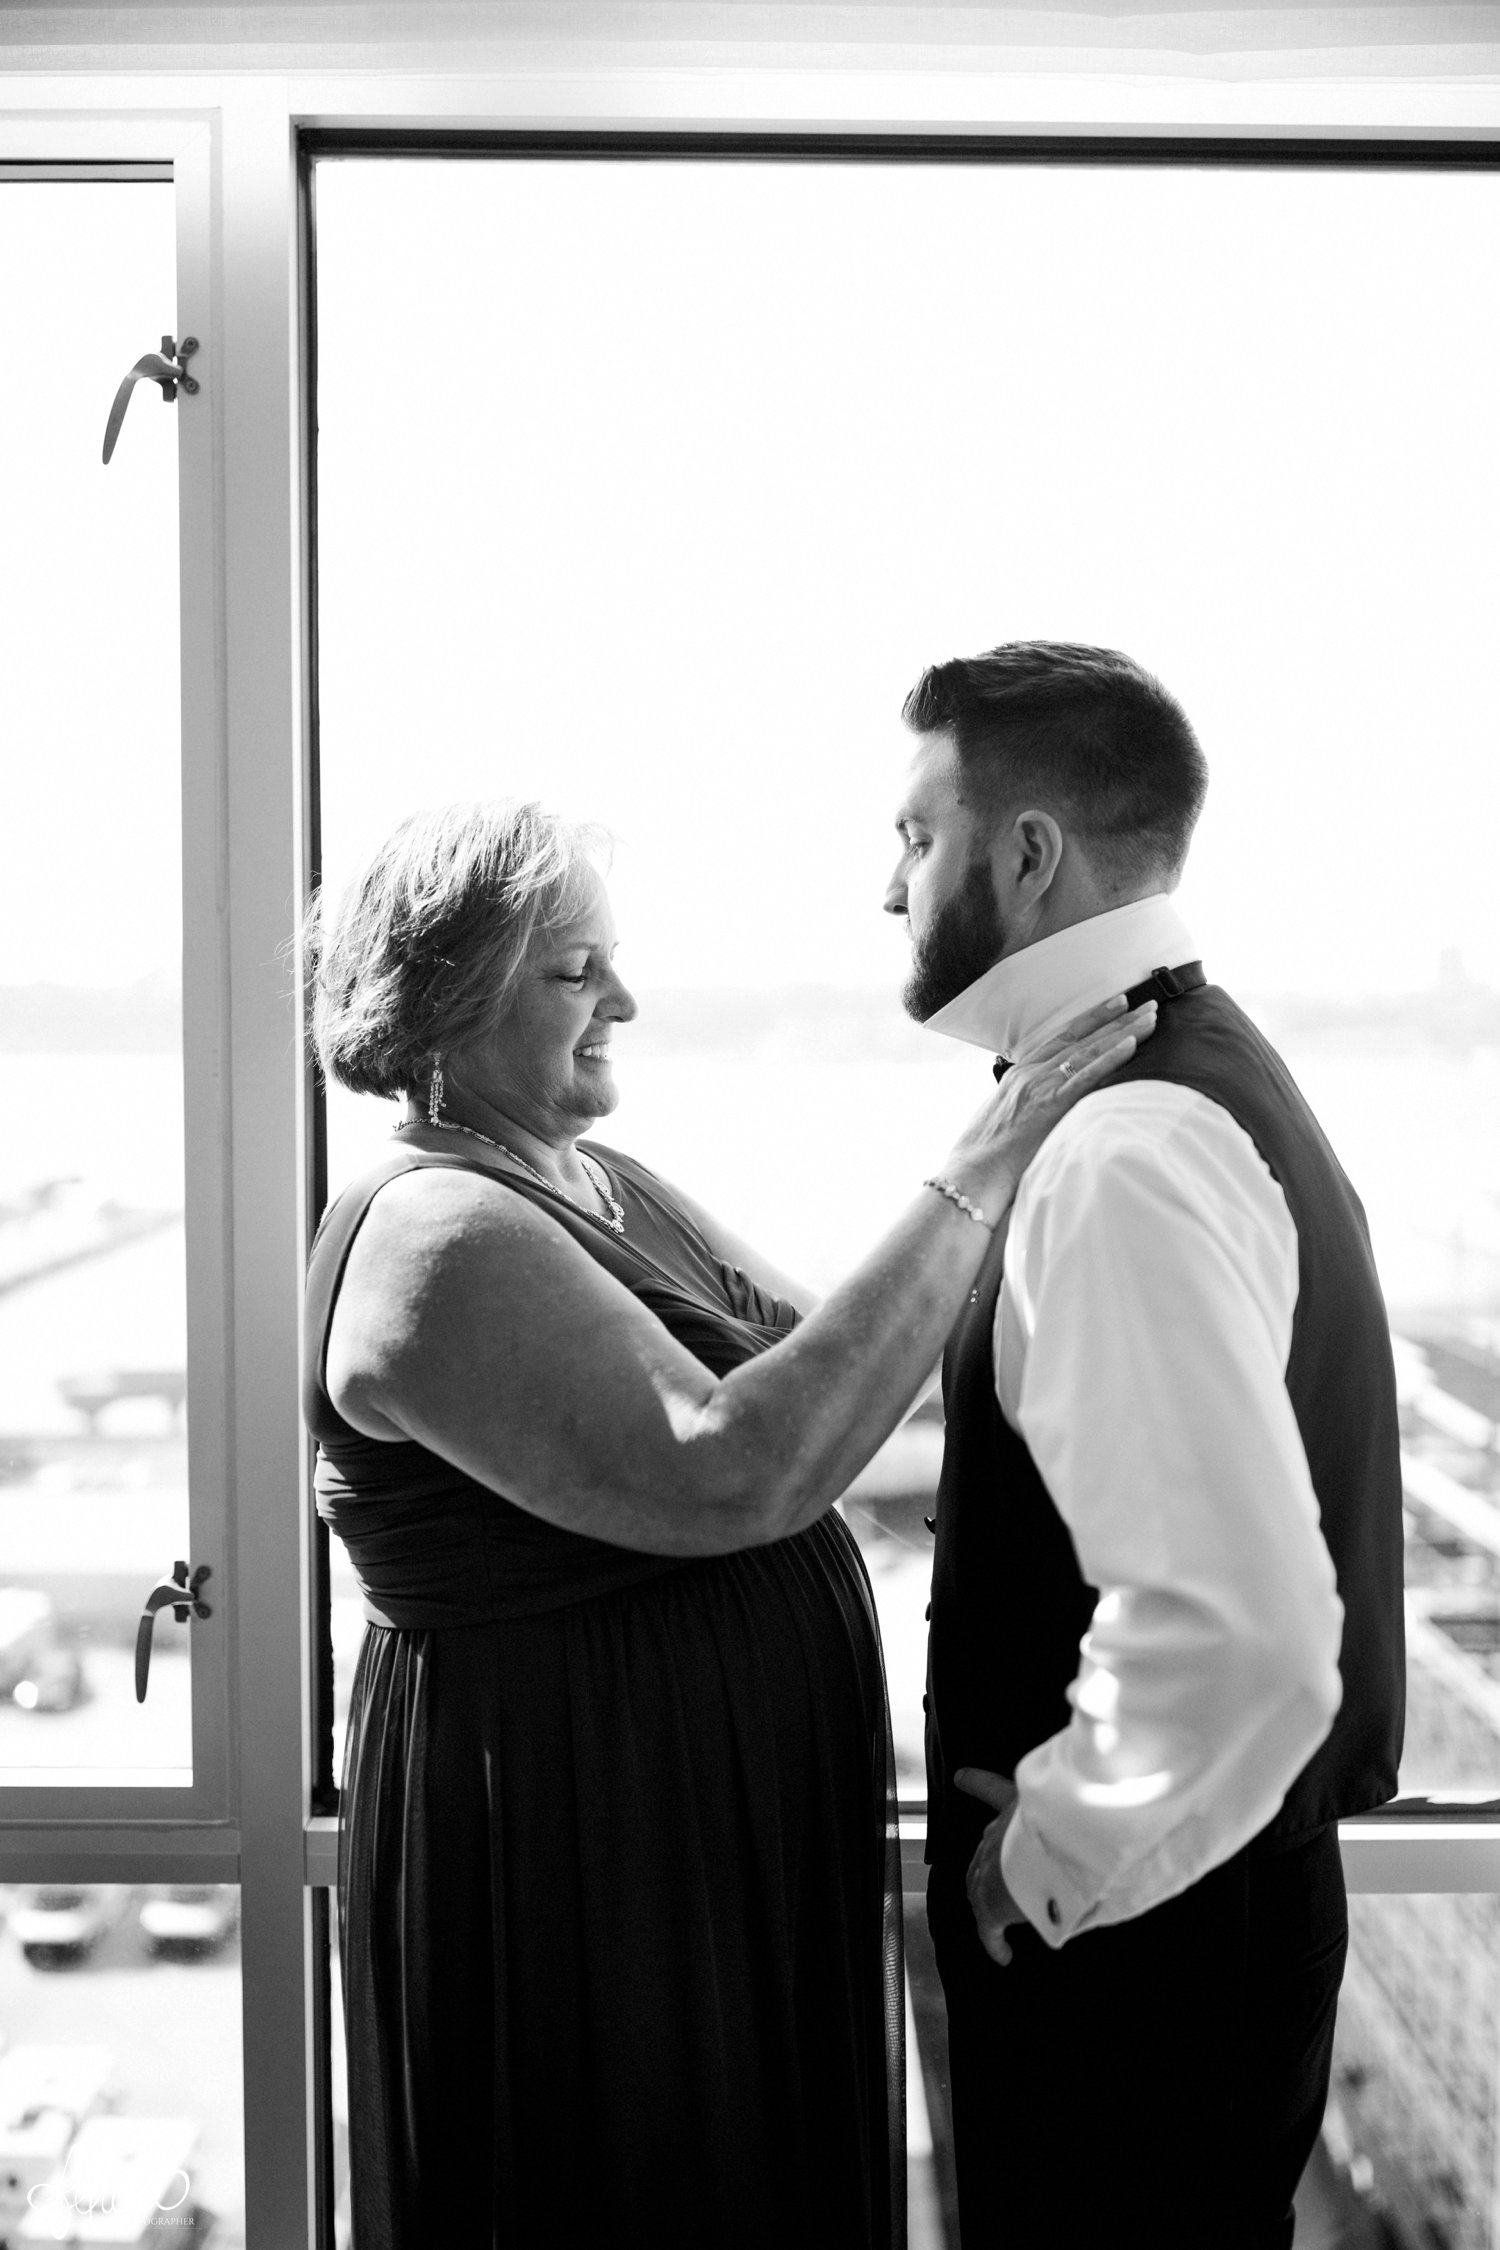 images by feliciathephotographer.com | destination wedding photographer | new york city | details | pre ceremony | getting ready | kimpton ink48 hotel | mother of the groom | suit | city view | natural light | black and white | mens warehouse | 